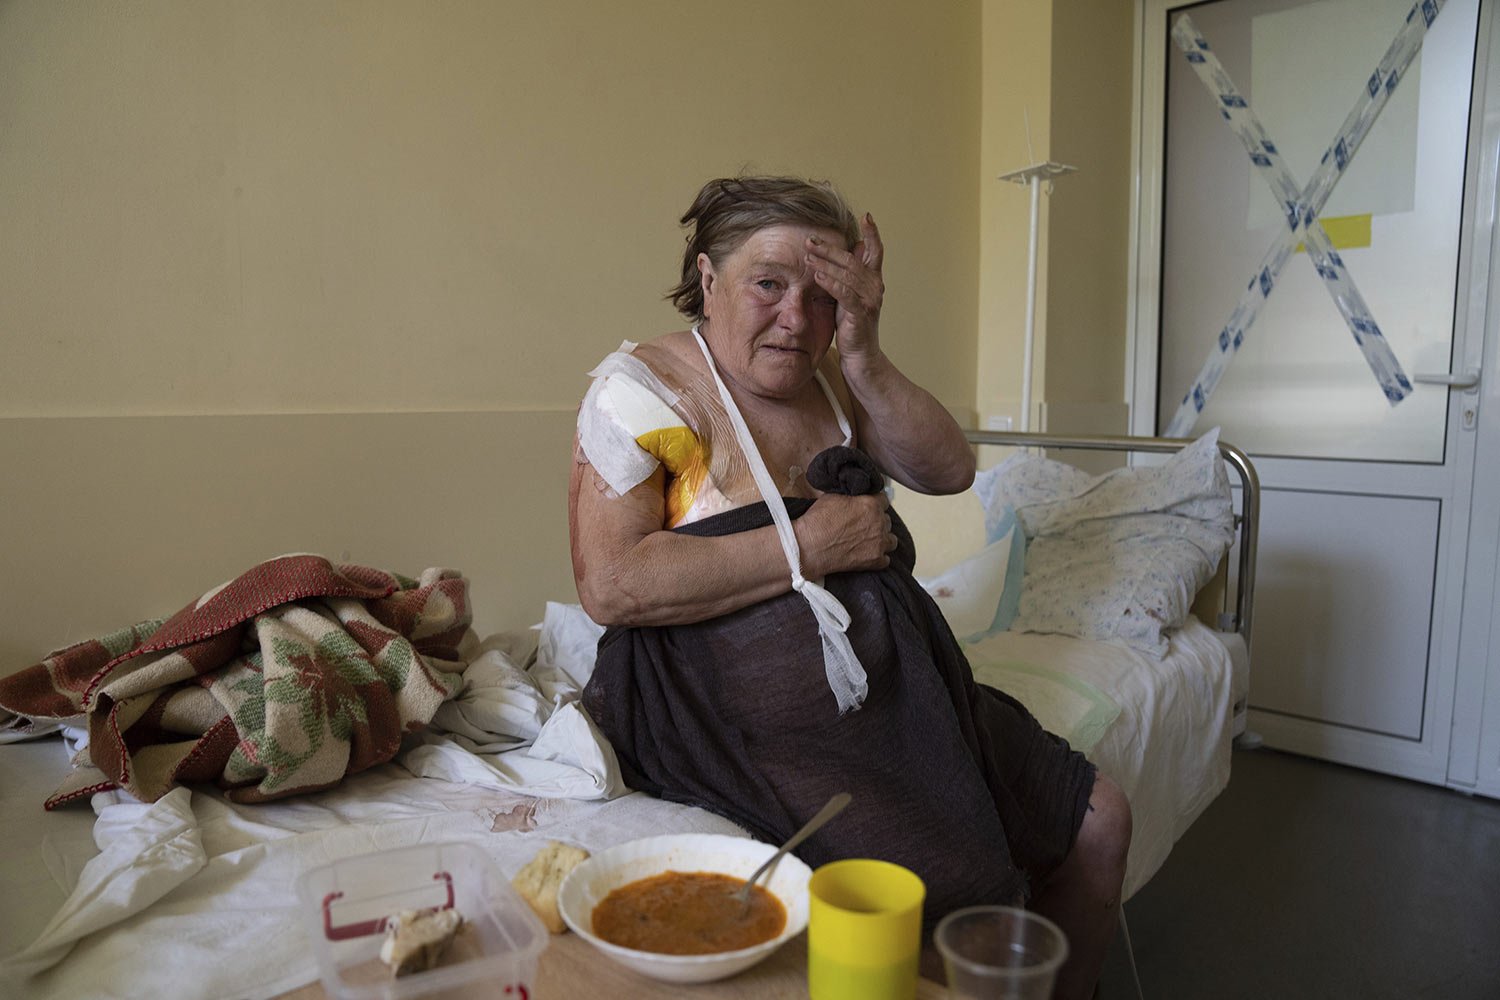  Tamara Oliynyk, 62, sits on a bed after surgery due to injuries form shelling in the village of Shandrigolovo village, as she recuperates at a hospital in Kramatorsk, eastern Ukraine, Tuesday, April 26, 2022. (AP Photo/Evgeniy Maloletka) 